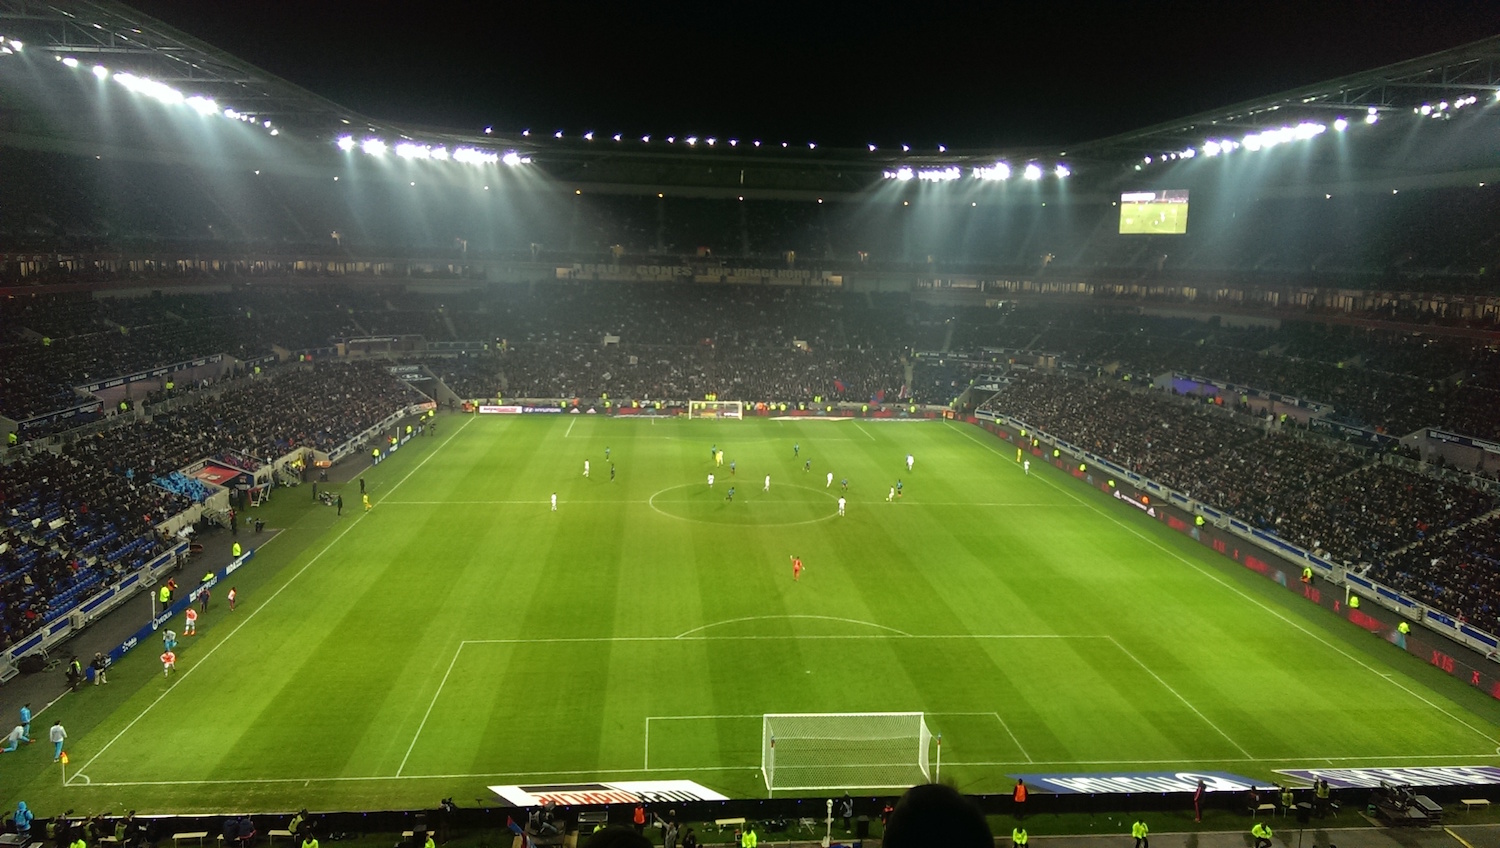 "Stade des Lumières" in Lyon, France, where Euro 2016 is currently playing out. Pic: Wikimedia Commons